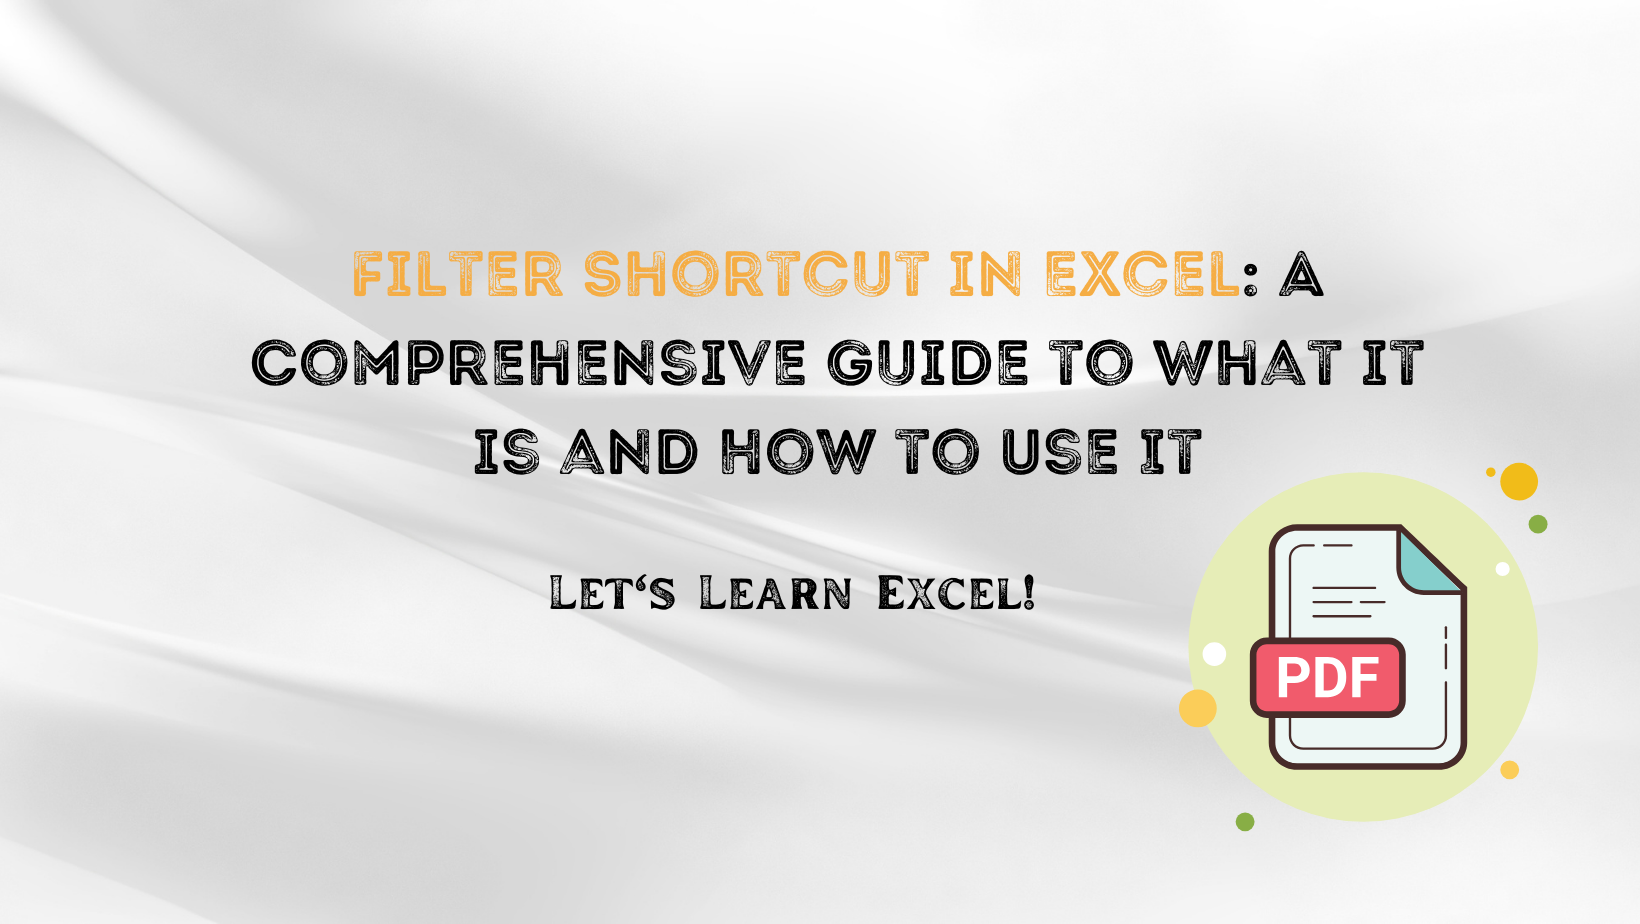 Filter Shortcut in Excel: A Comprehensive Guide to What it is and How to Use It